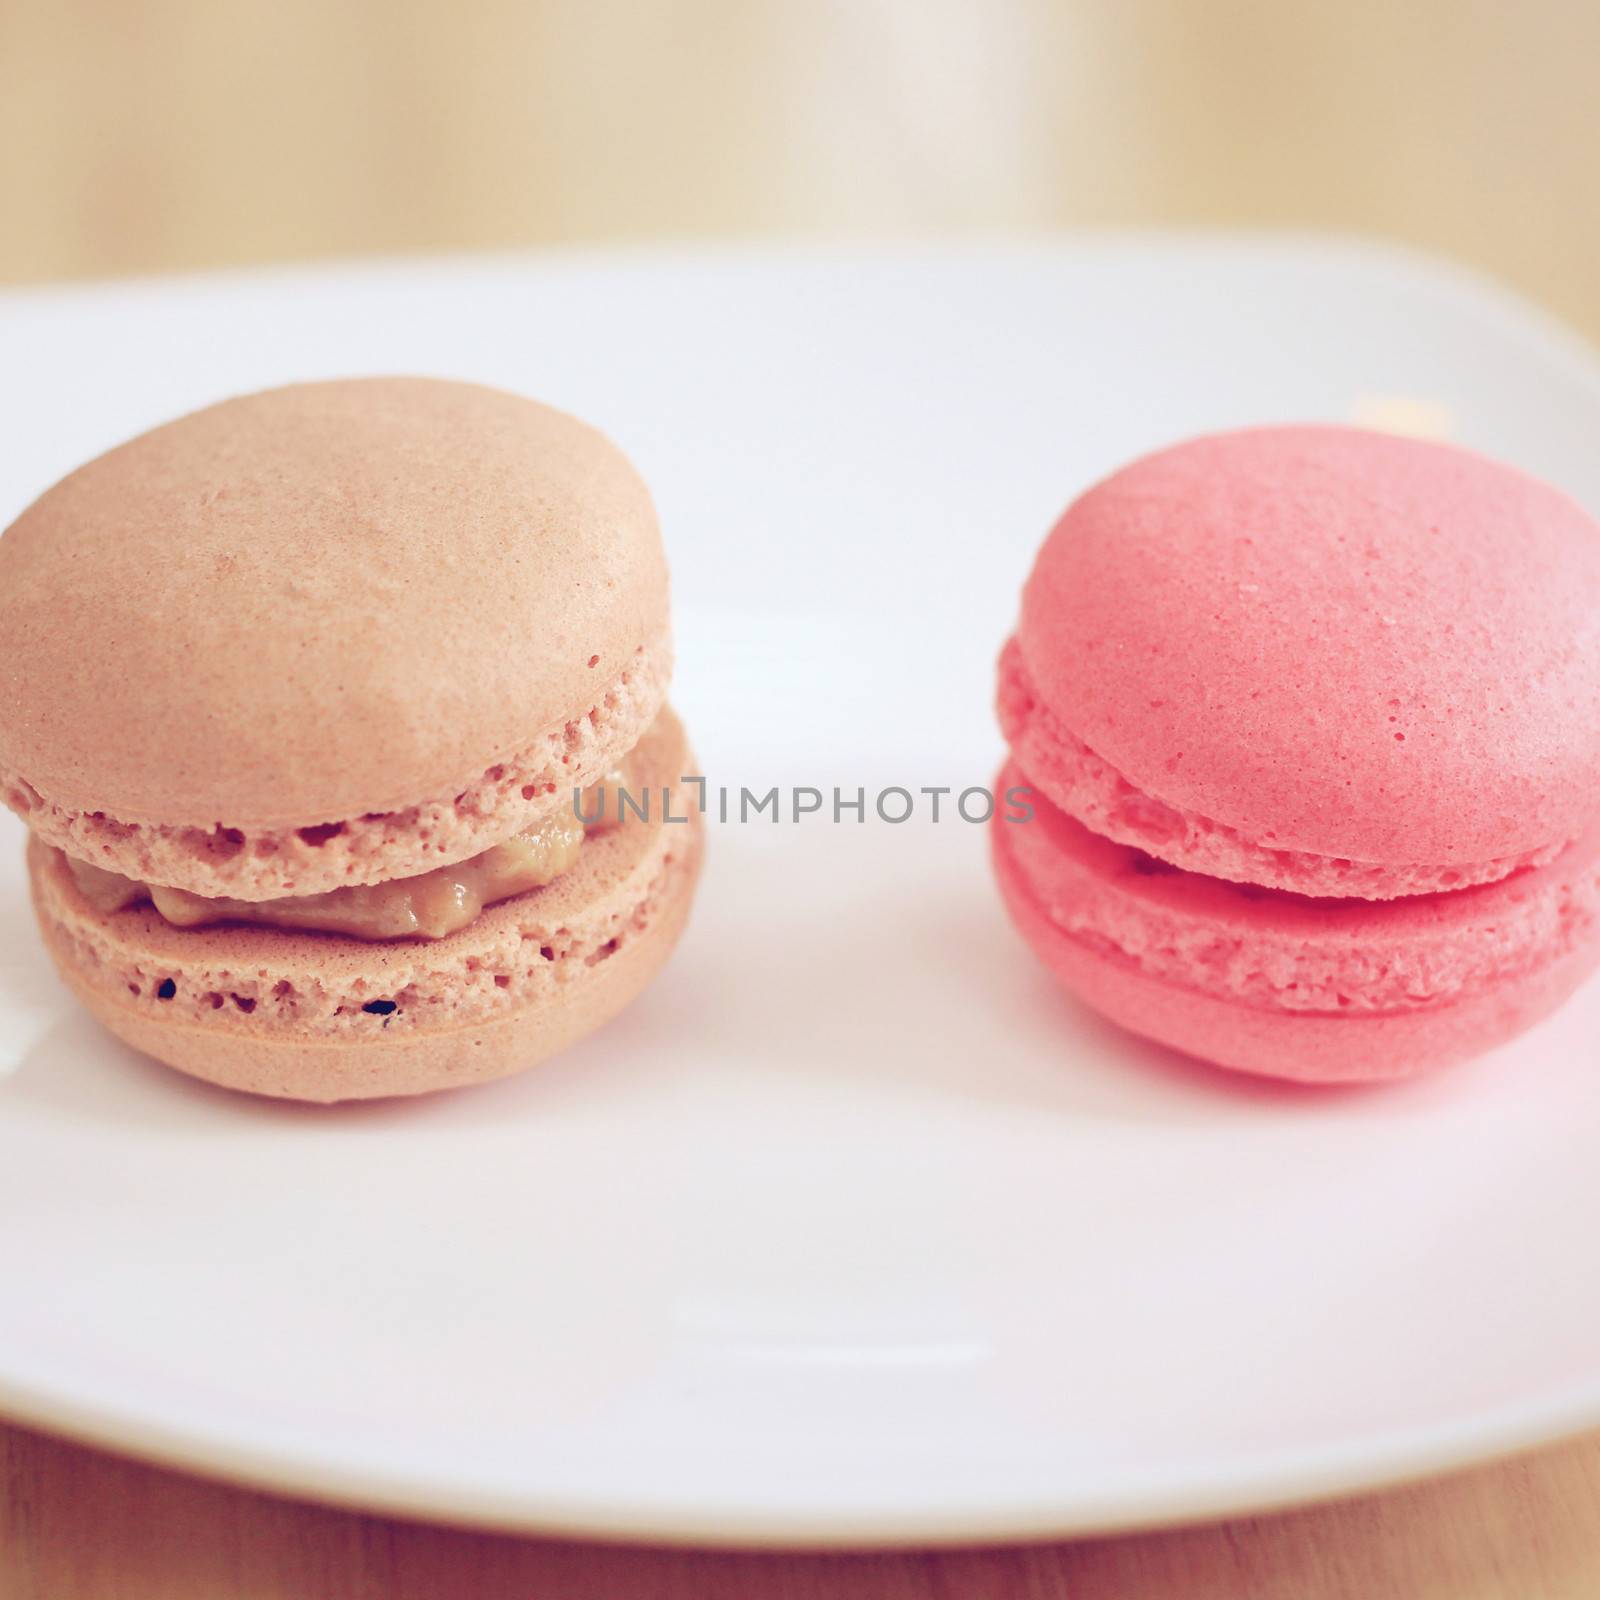 Tasty sweet macaron with retro filter effect by nuchylee